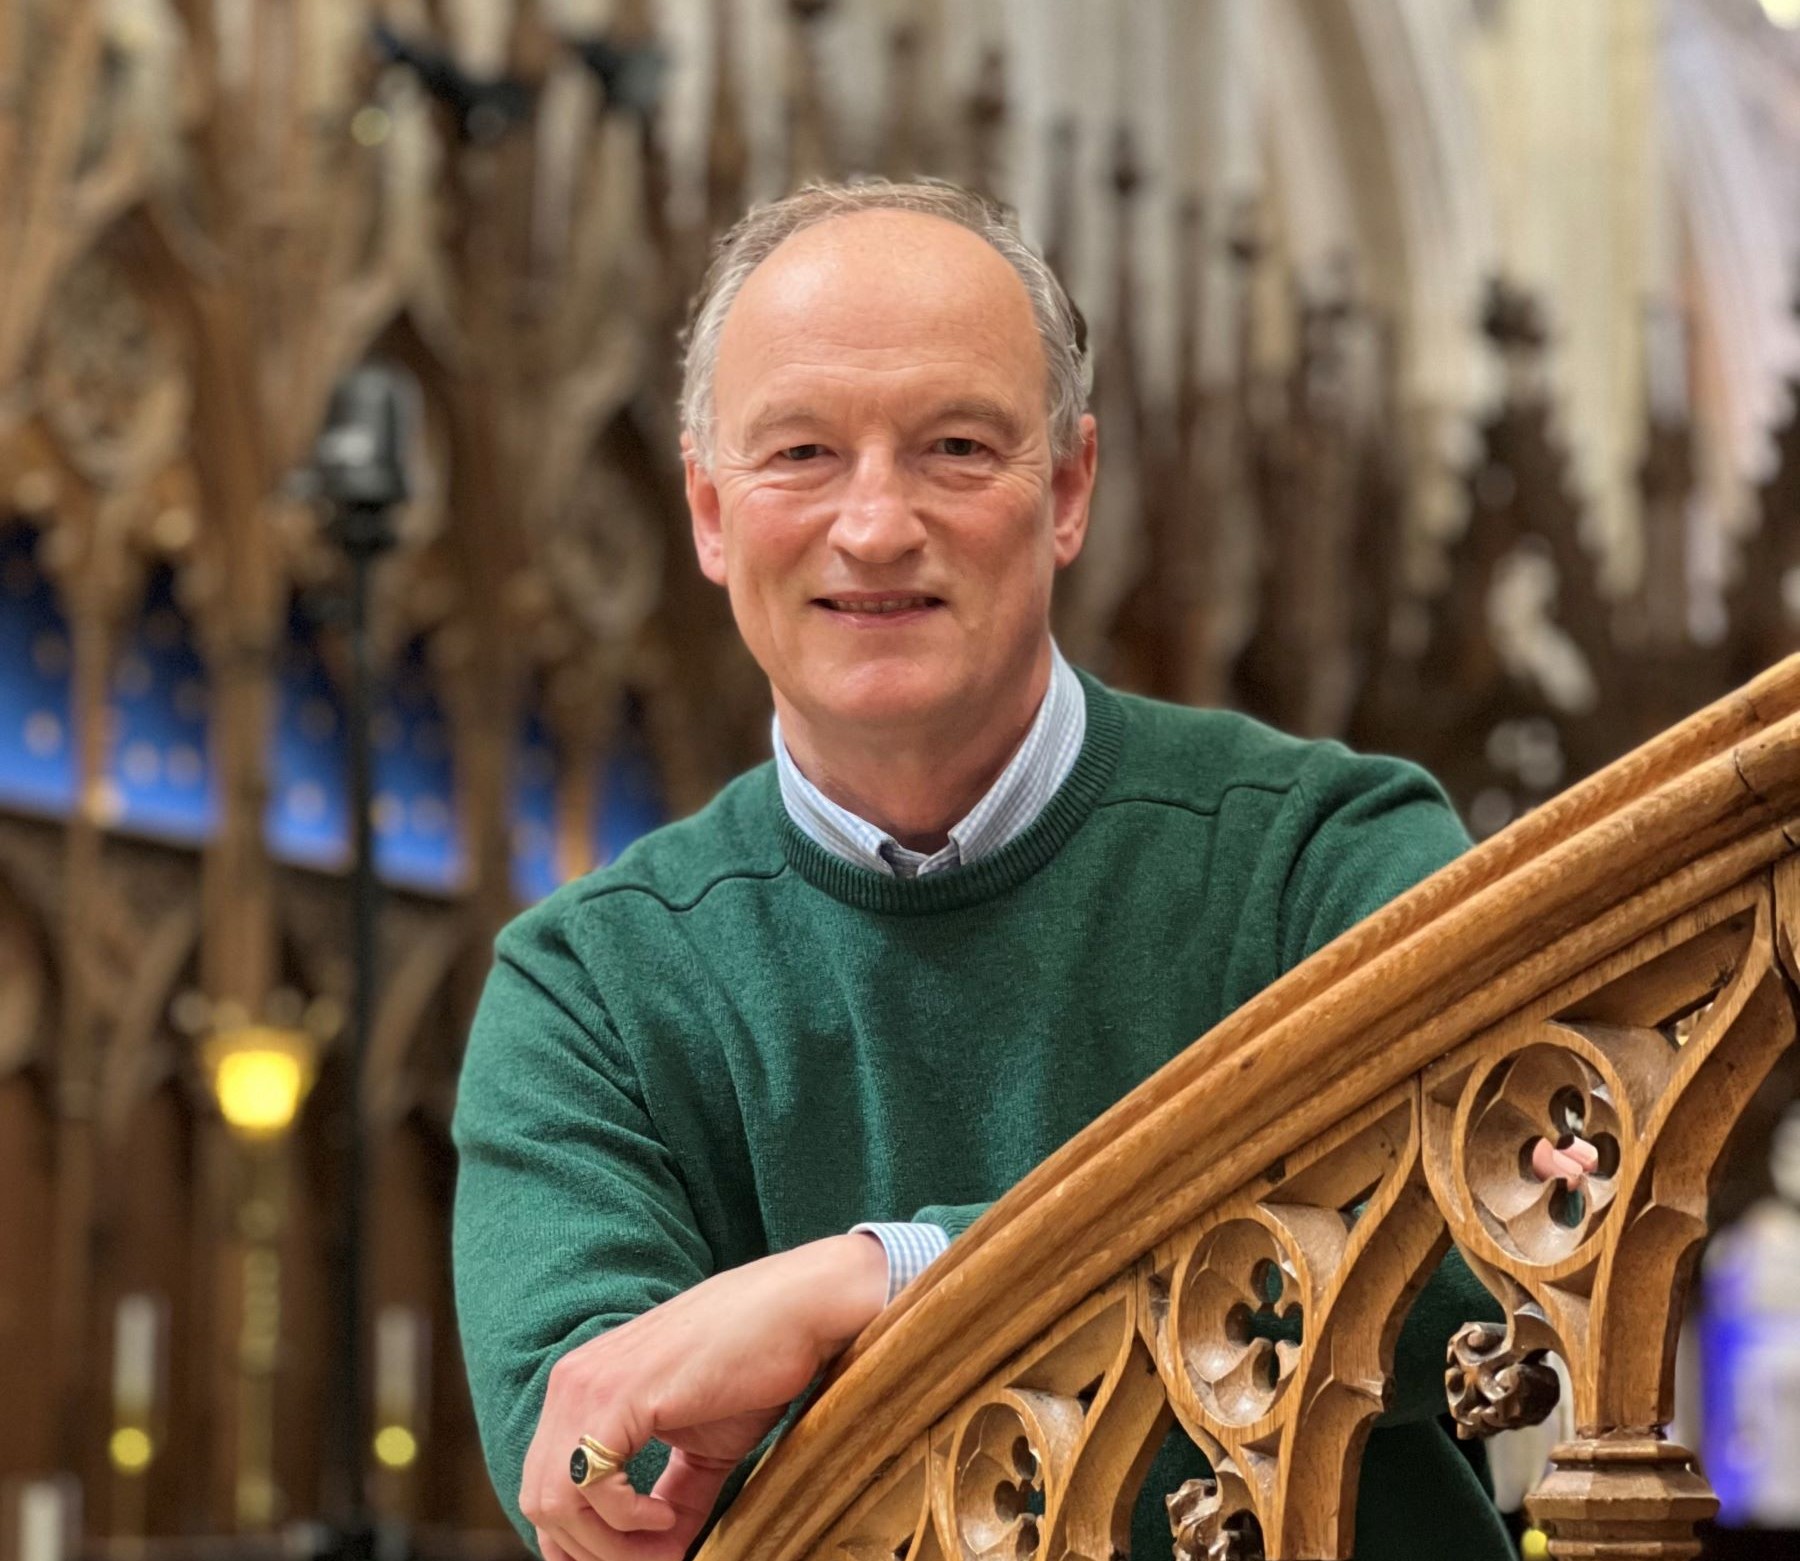 Middle aged man with green jumper looking over ornate banister rail